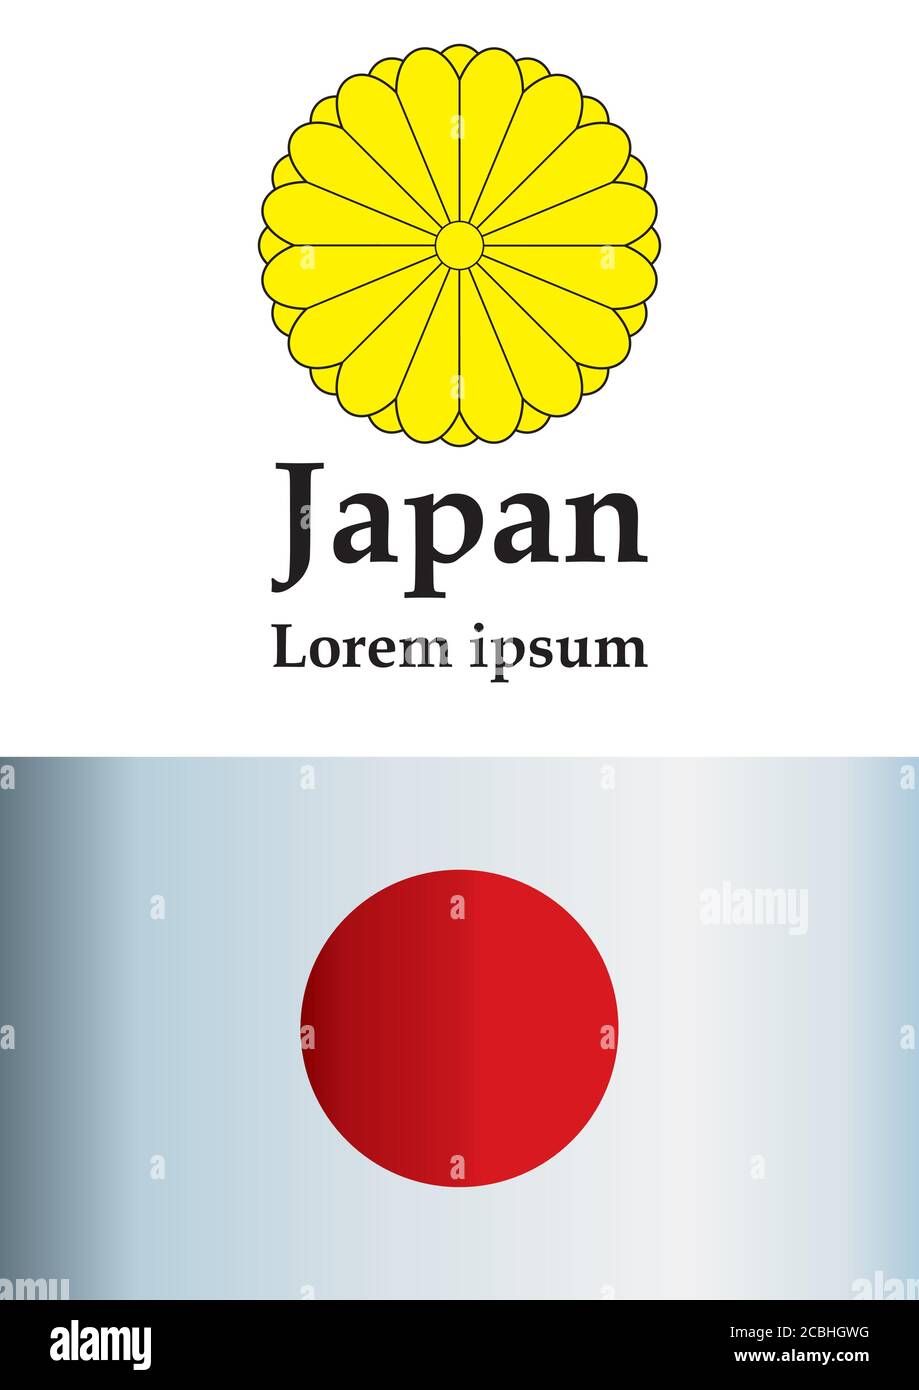 Flag Of Japan Land Of The Rising Sun Template For Award Design An Official Document With The Flag Of Japan Stock Vector Image Art Alamy